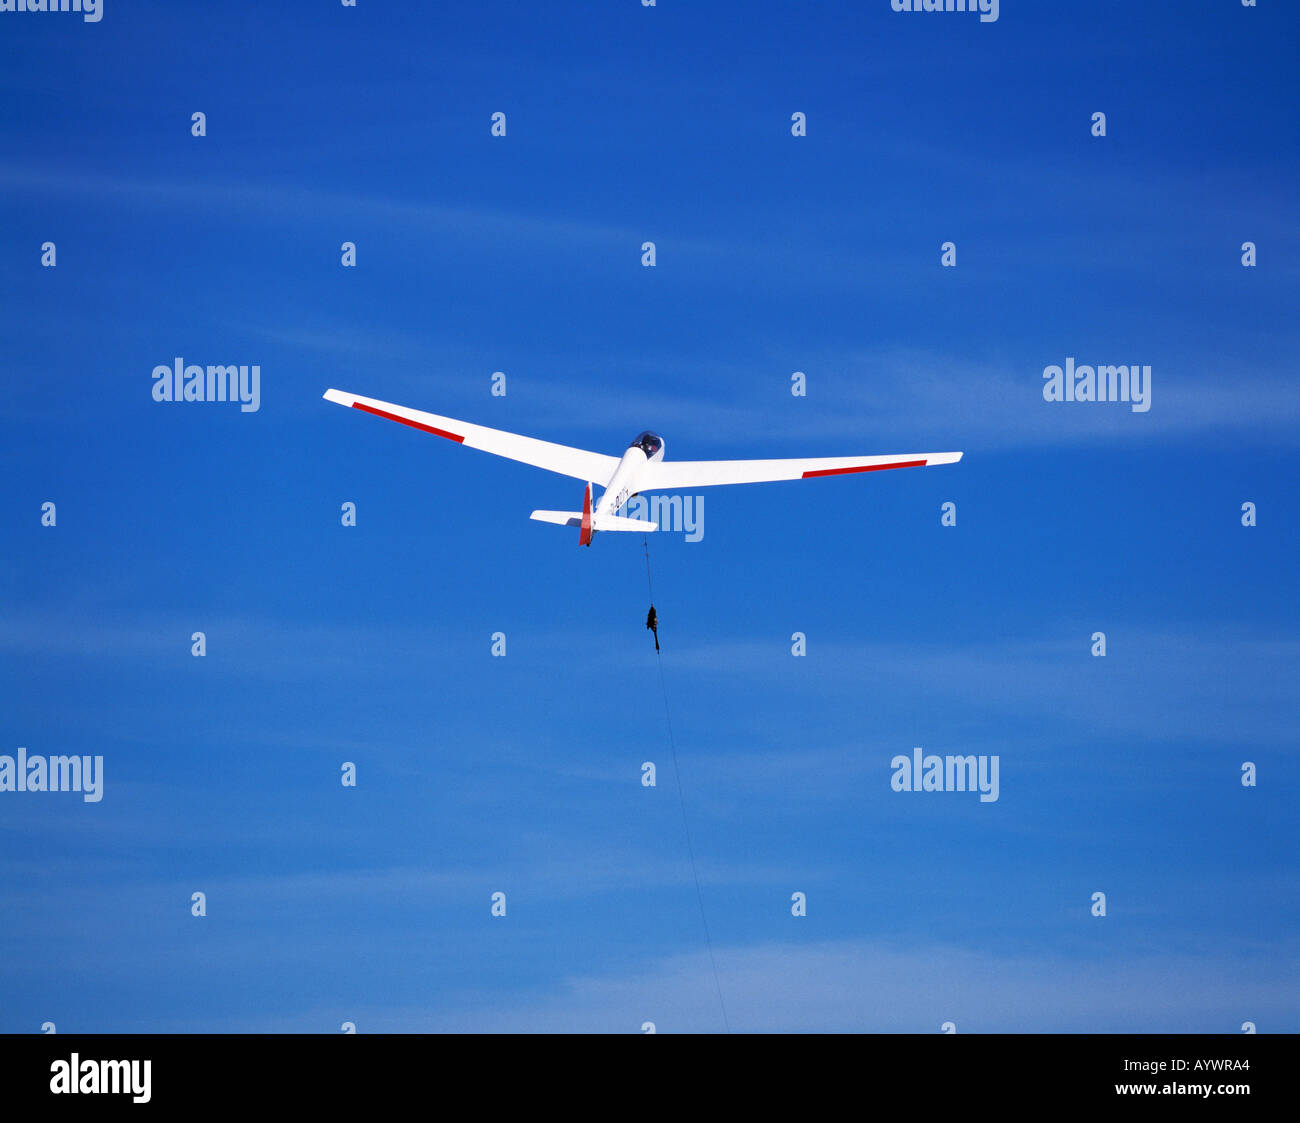 D-Hamm, Ruhr area, North Rhine-Westphalia, gliding field, starting glider, glider will be pulled up to the sky by cable, aeroplane on the sky, starting aeroplane, start, sports plane, two-seater, gliding, glider, glider flight, air traffic, blue sky, airp Stock Photo